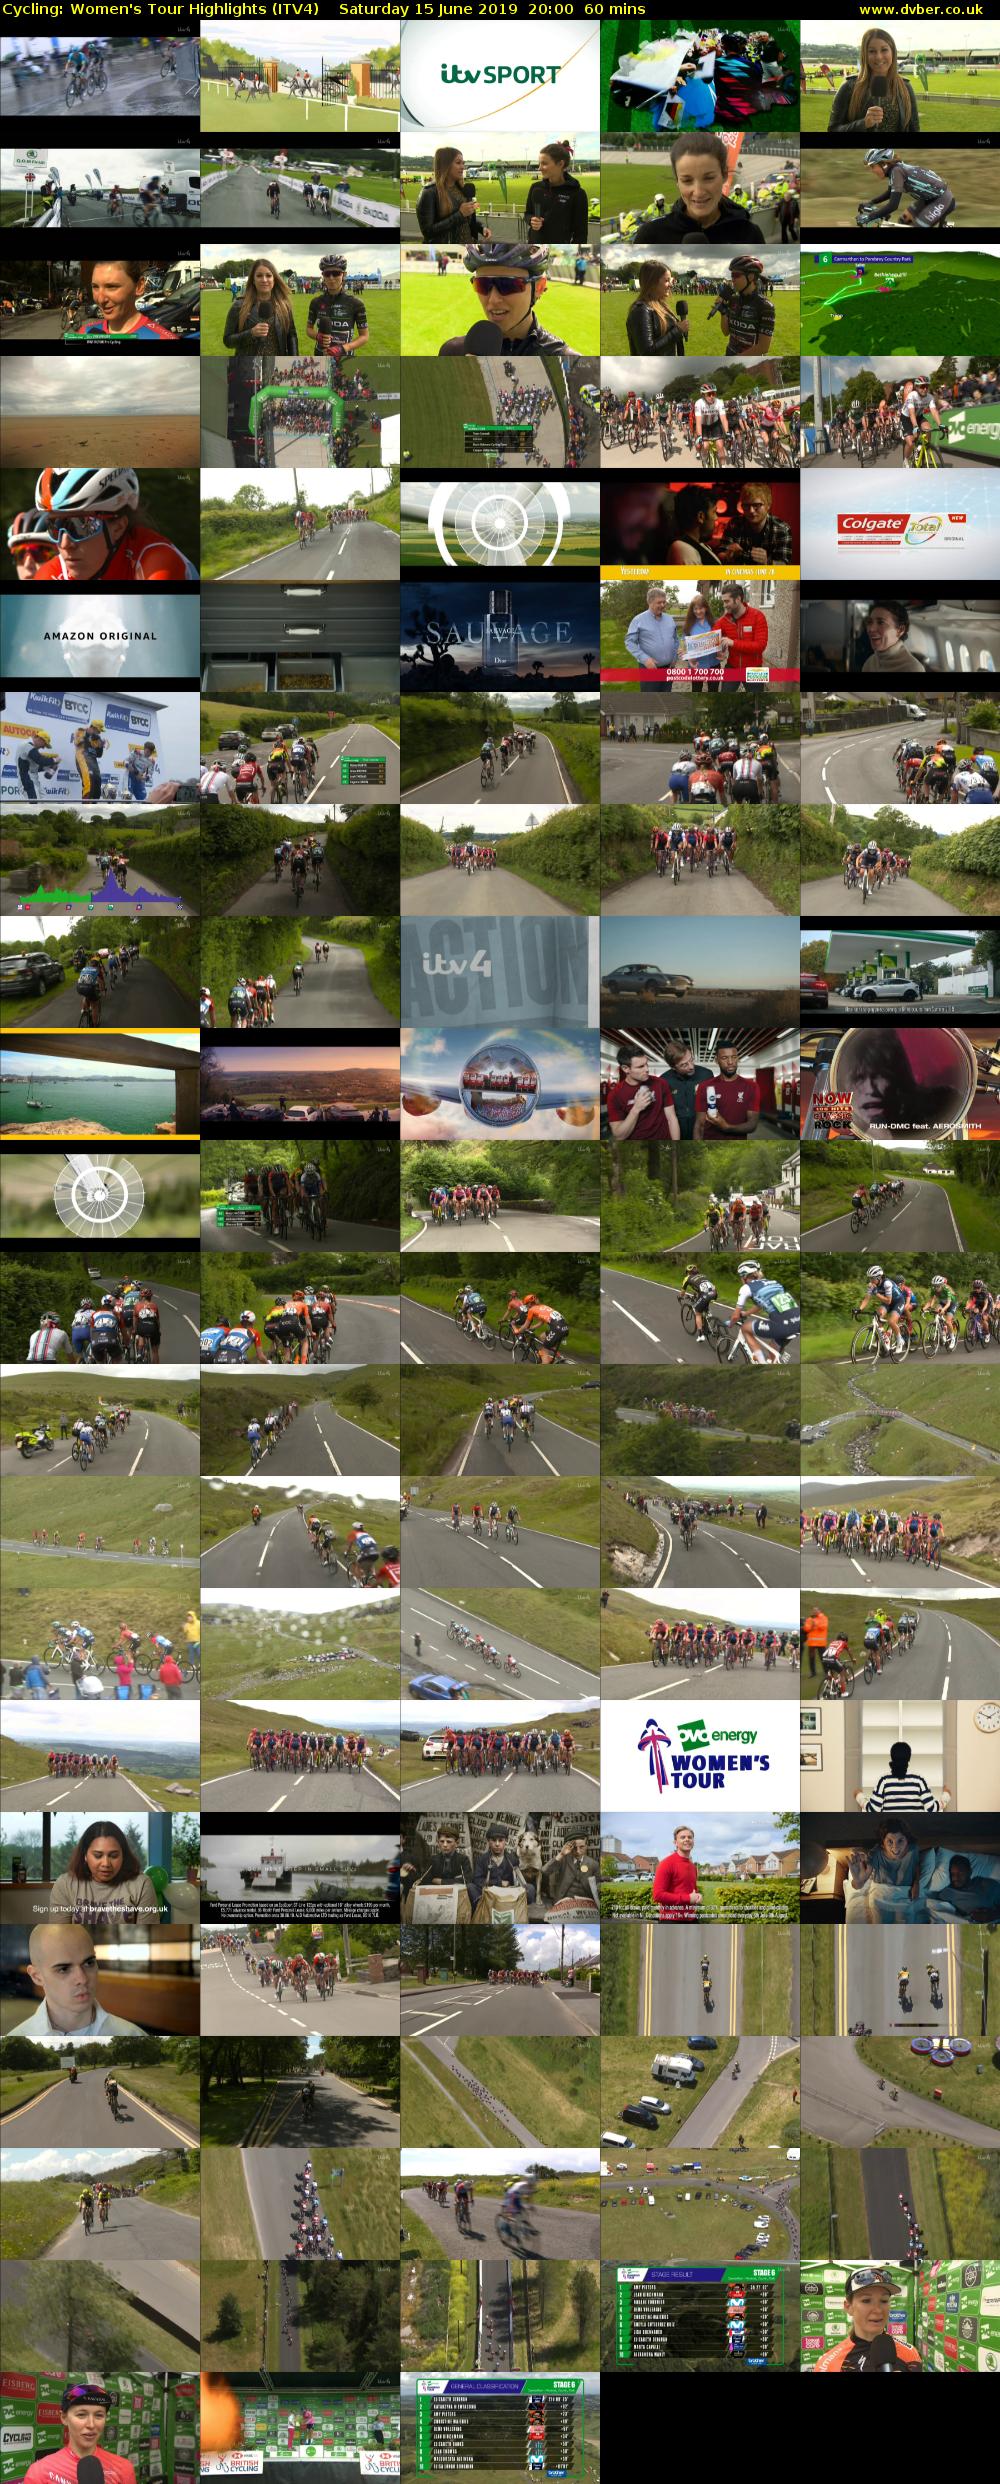 Cycling: Women's Tour Highlights (ITV4) Saturday 15 June 2019 20:00 - 21:00